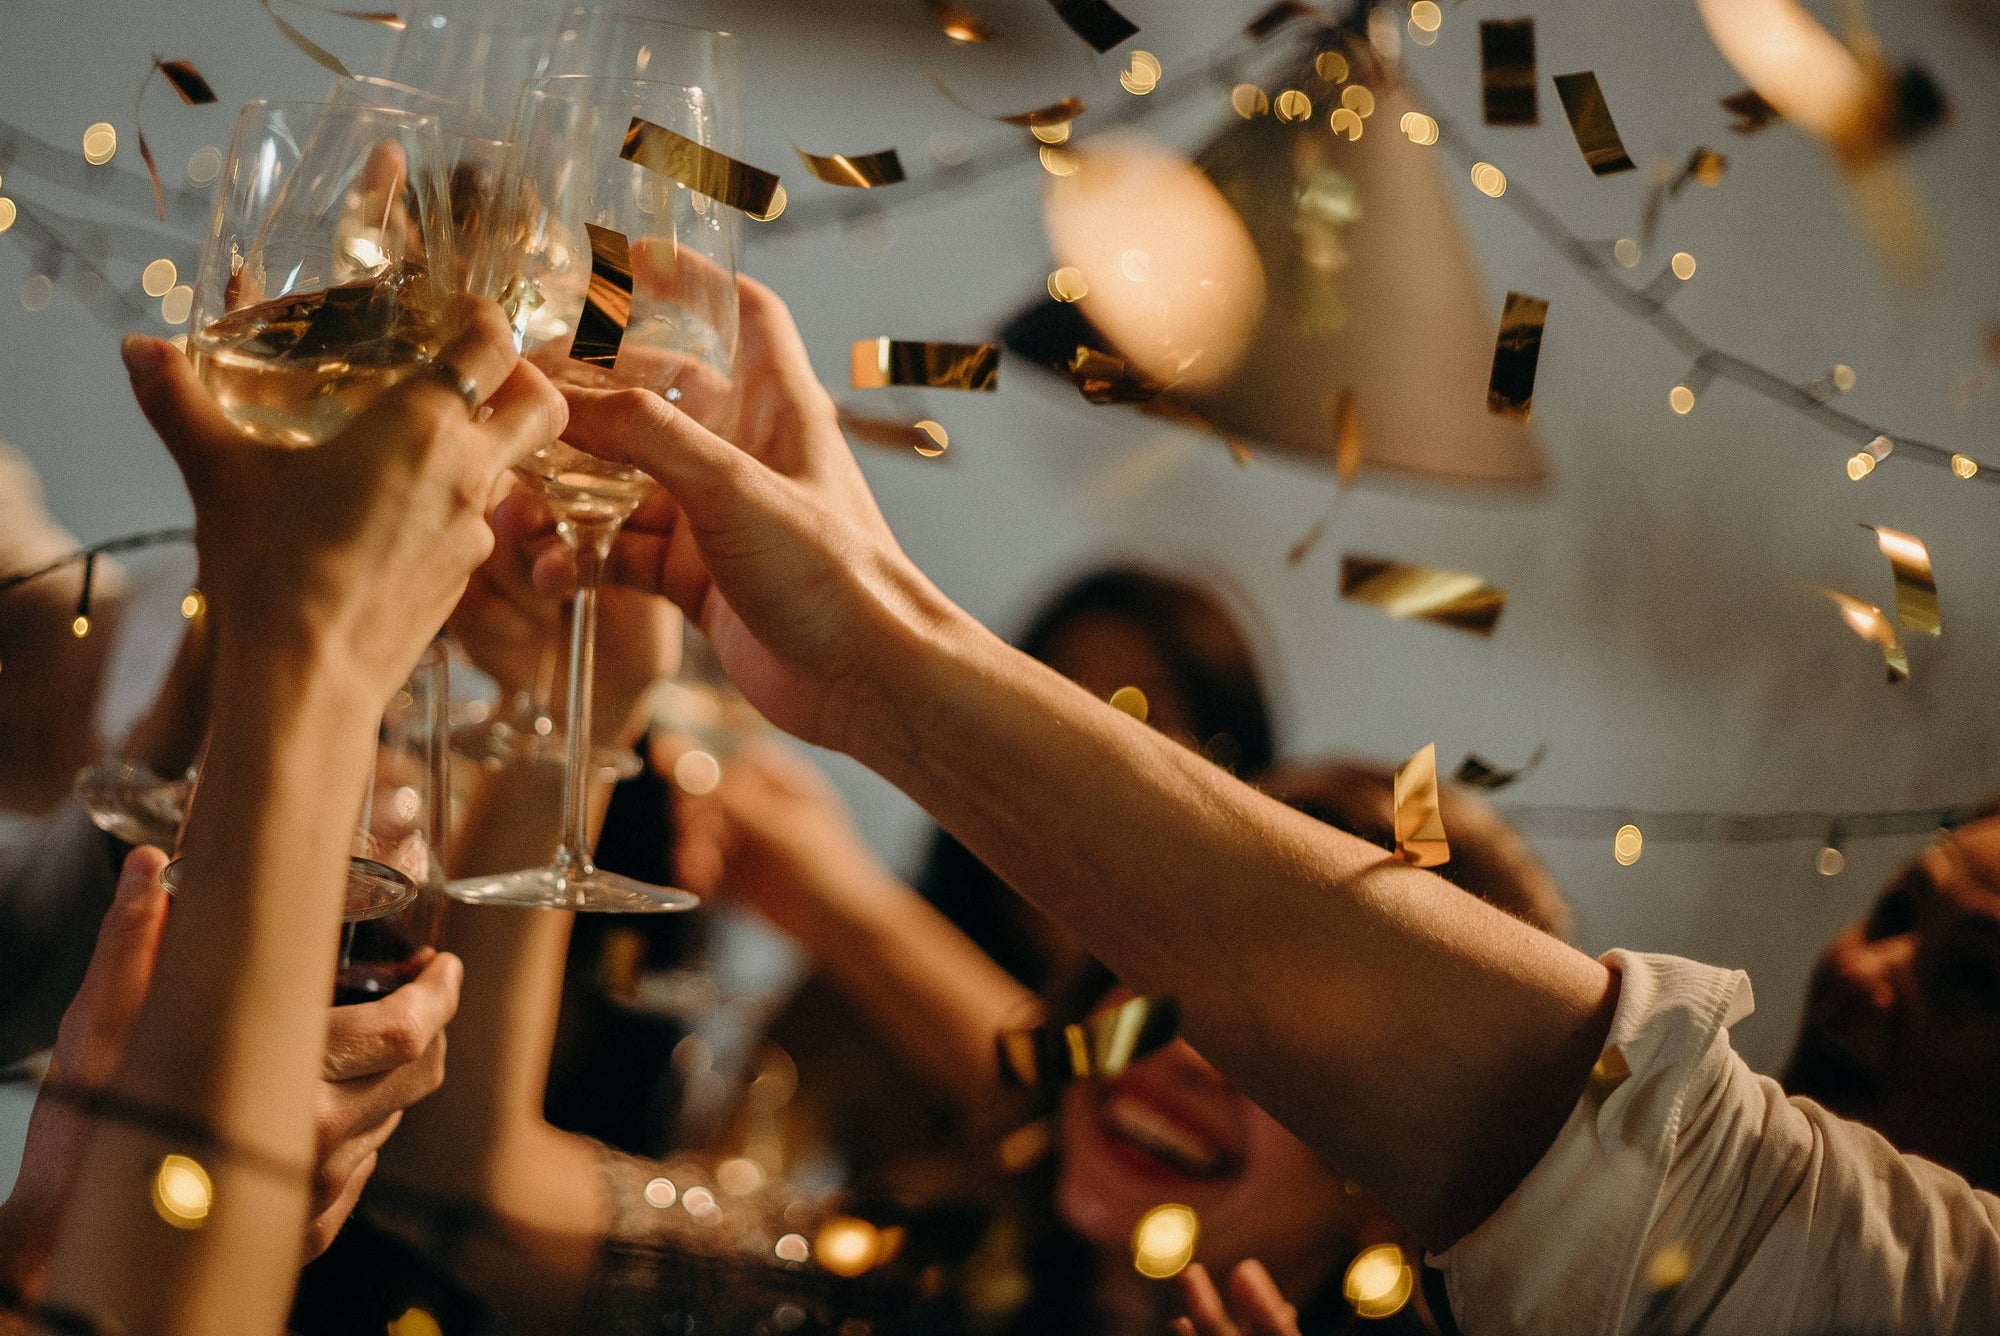 5 Tips For Hosting a Fun Dry January Party